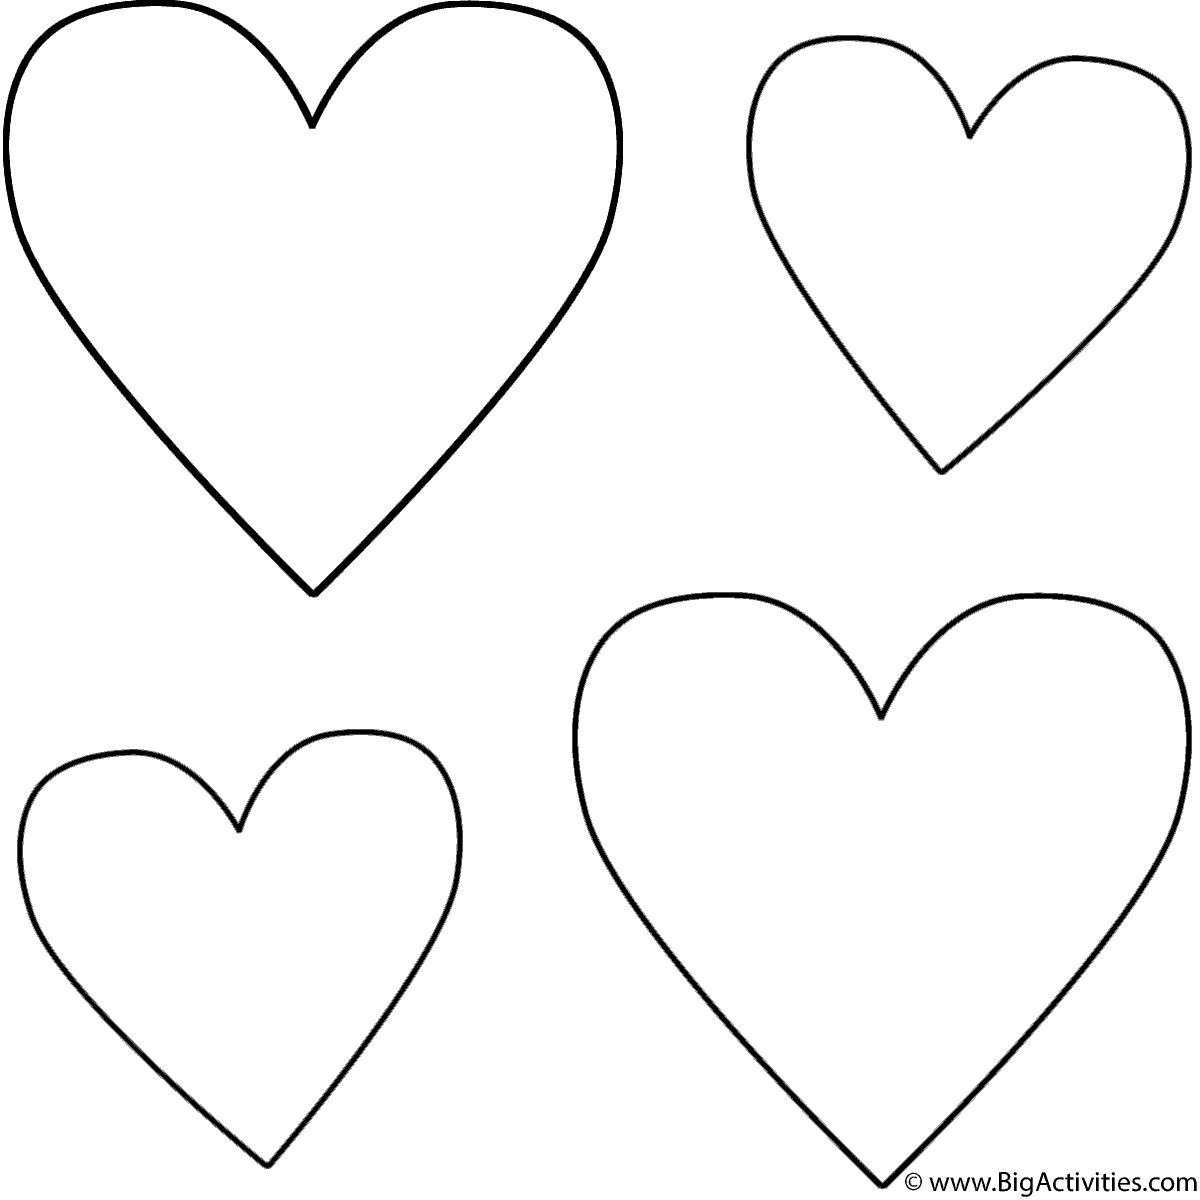 four-hearts-coloring-page-valentine-s-day